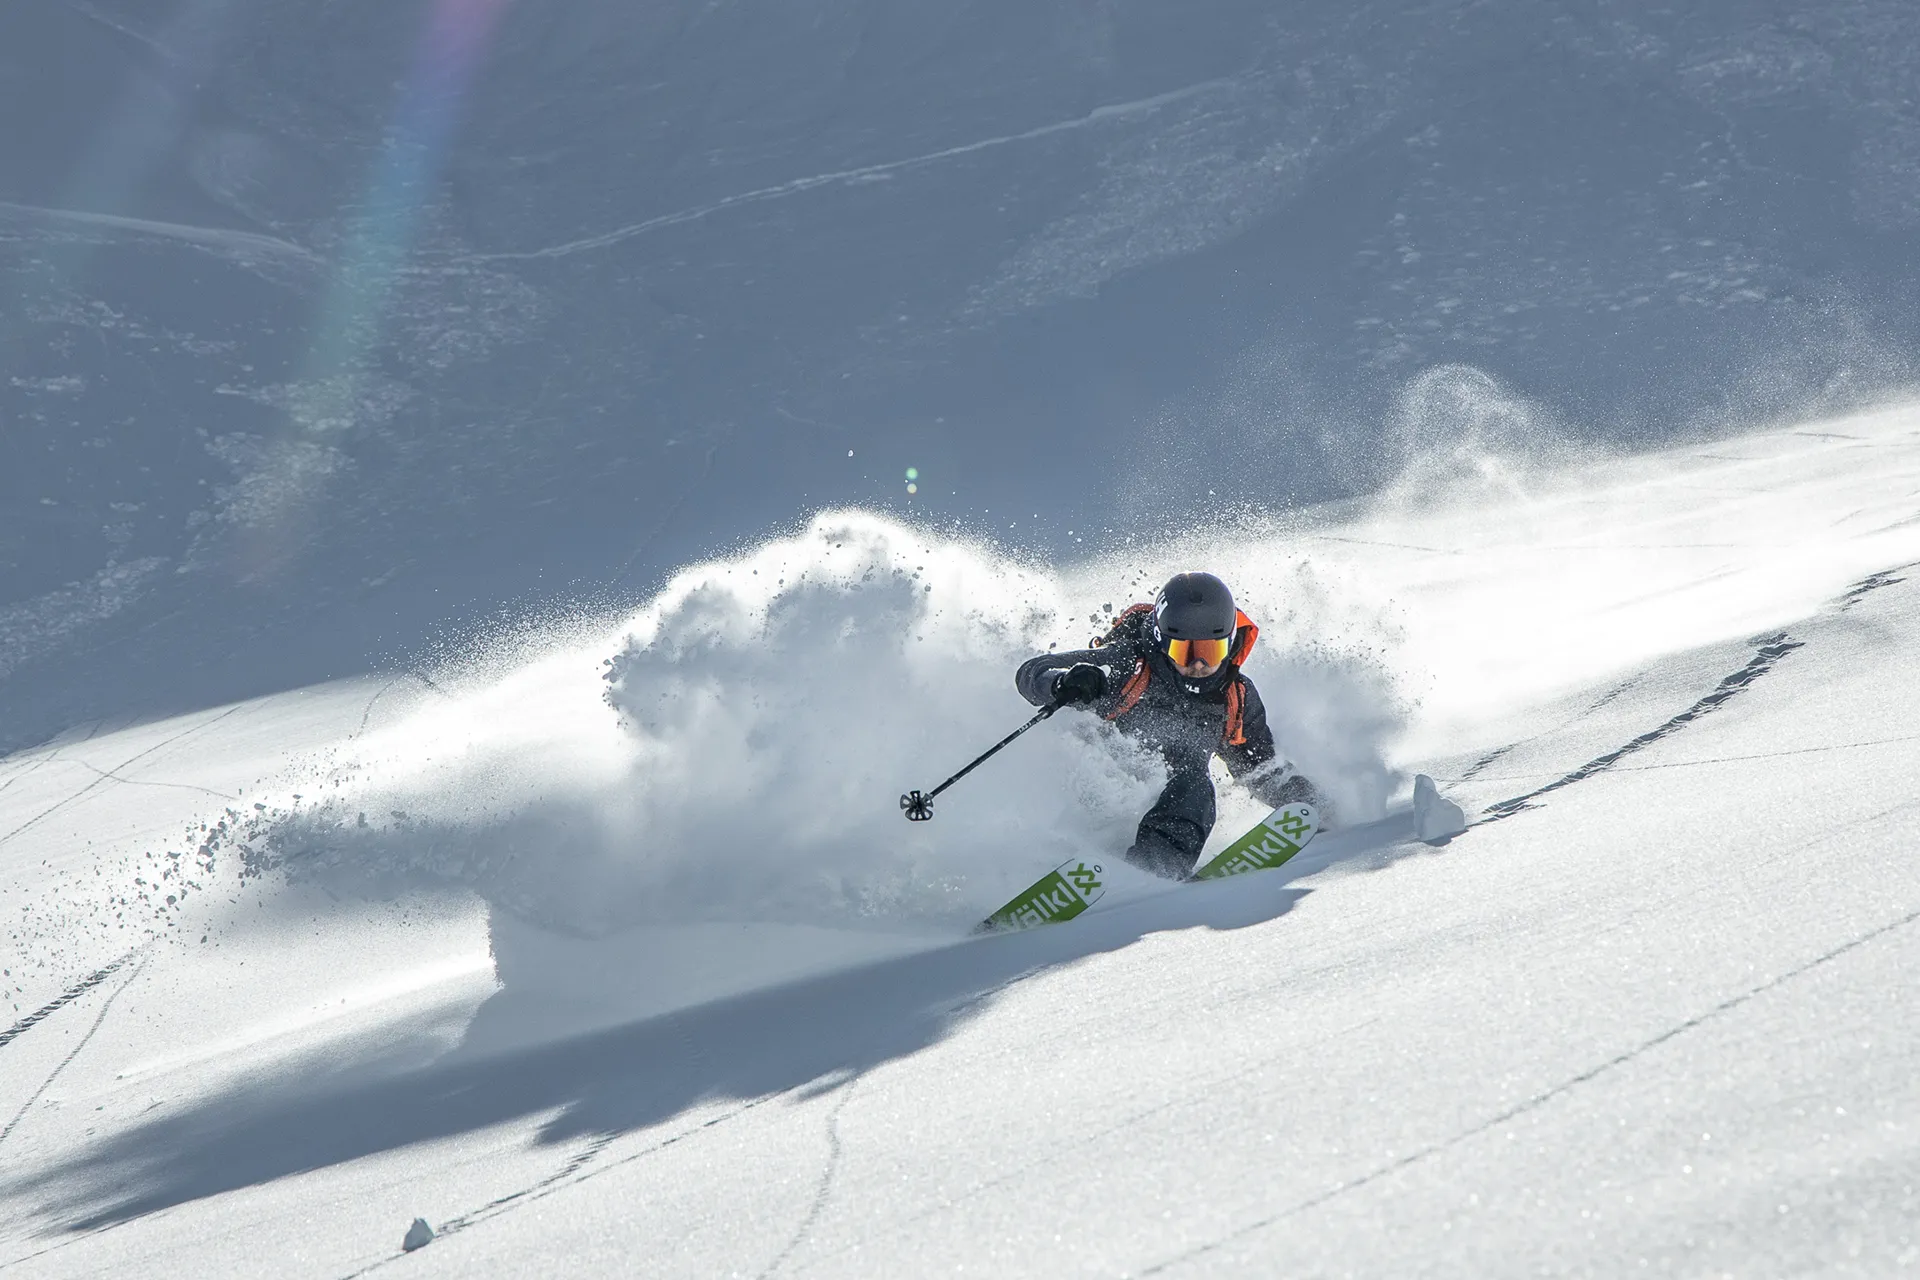 Freeride and skiing technique